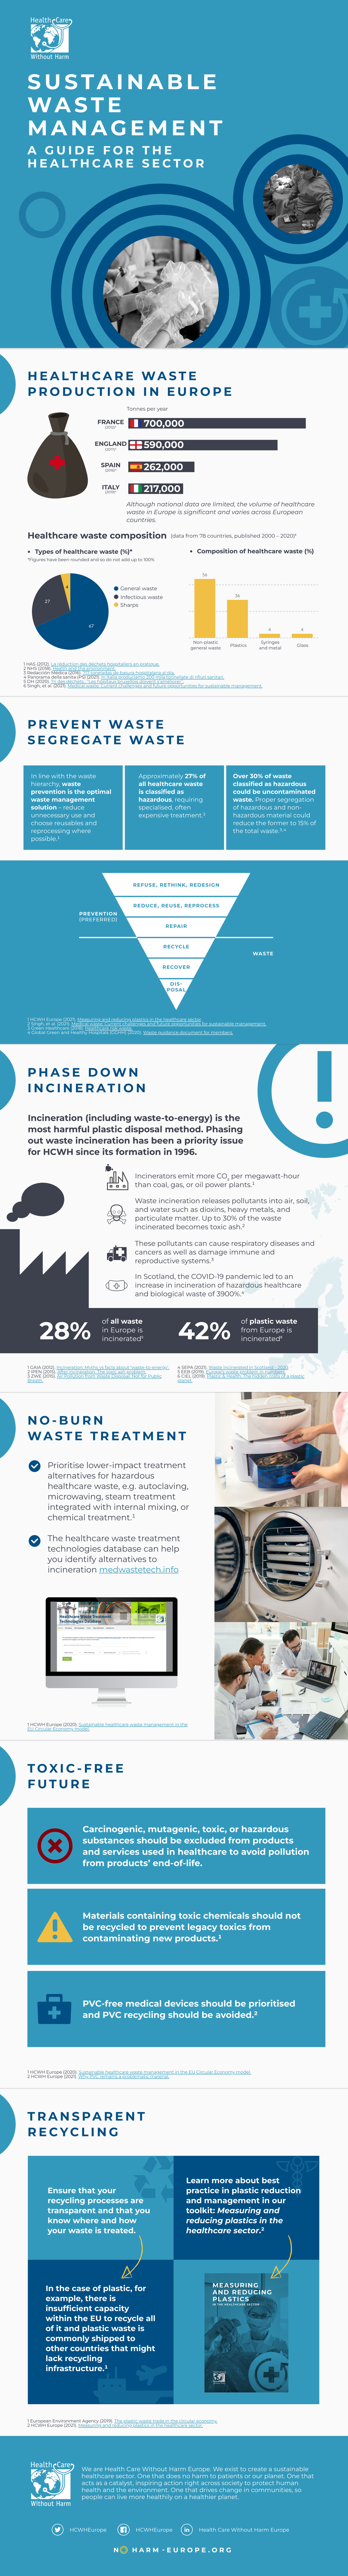 Sustainable waste management - A guide for the healthcare sector